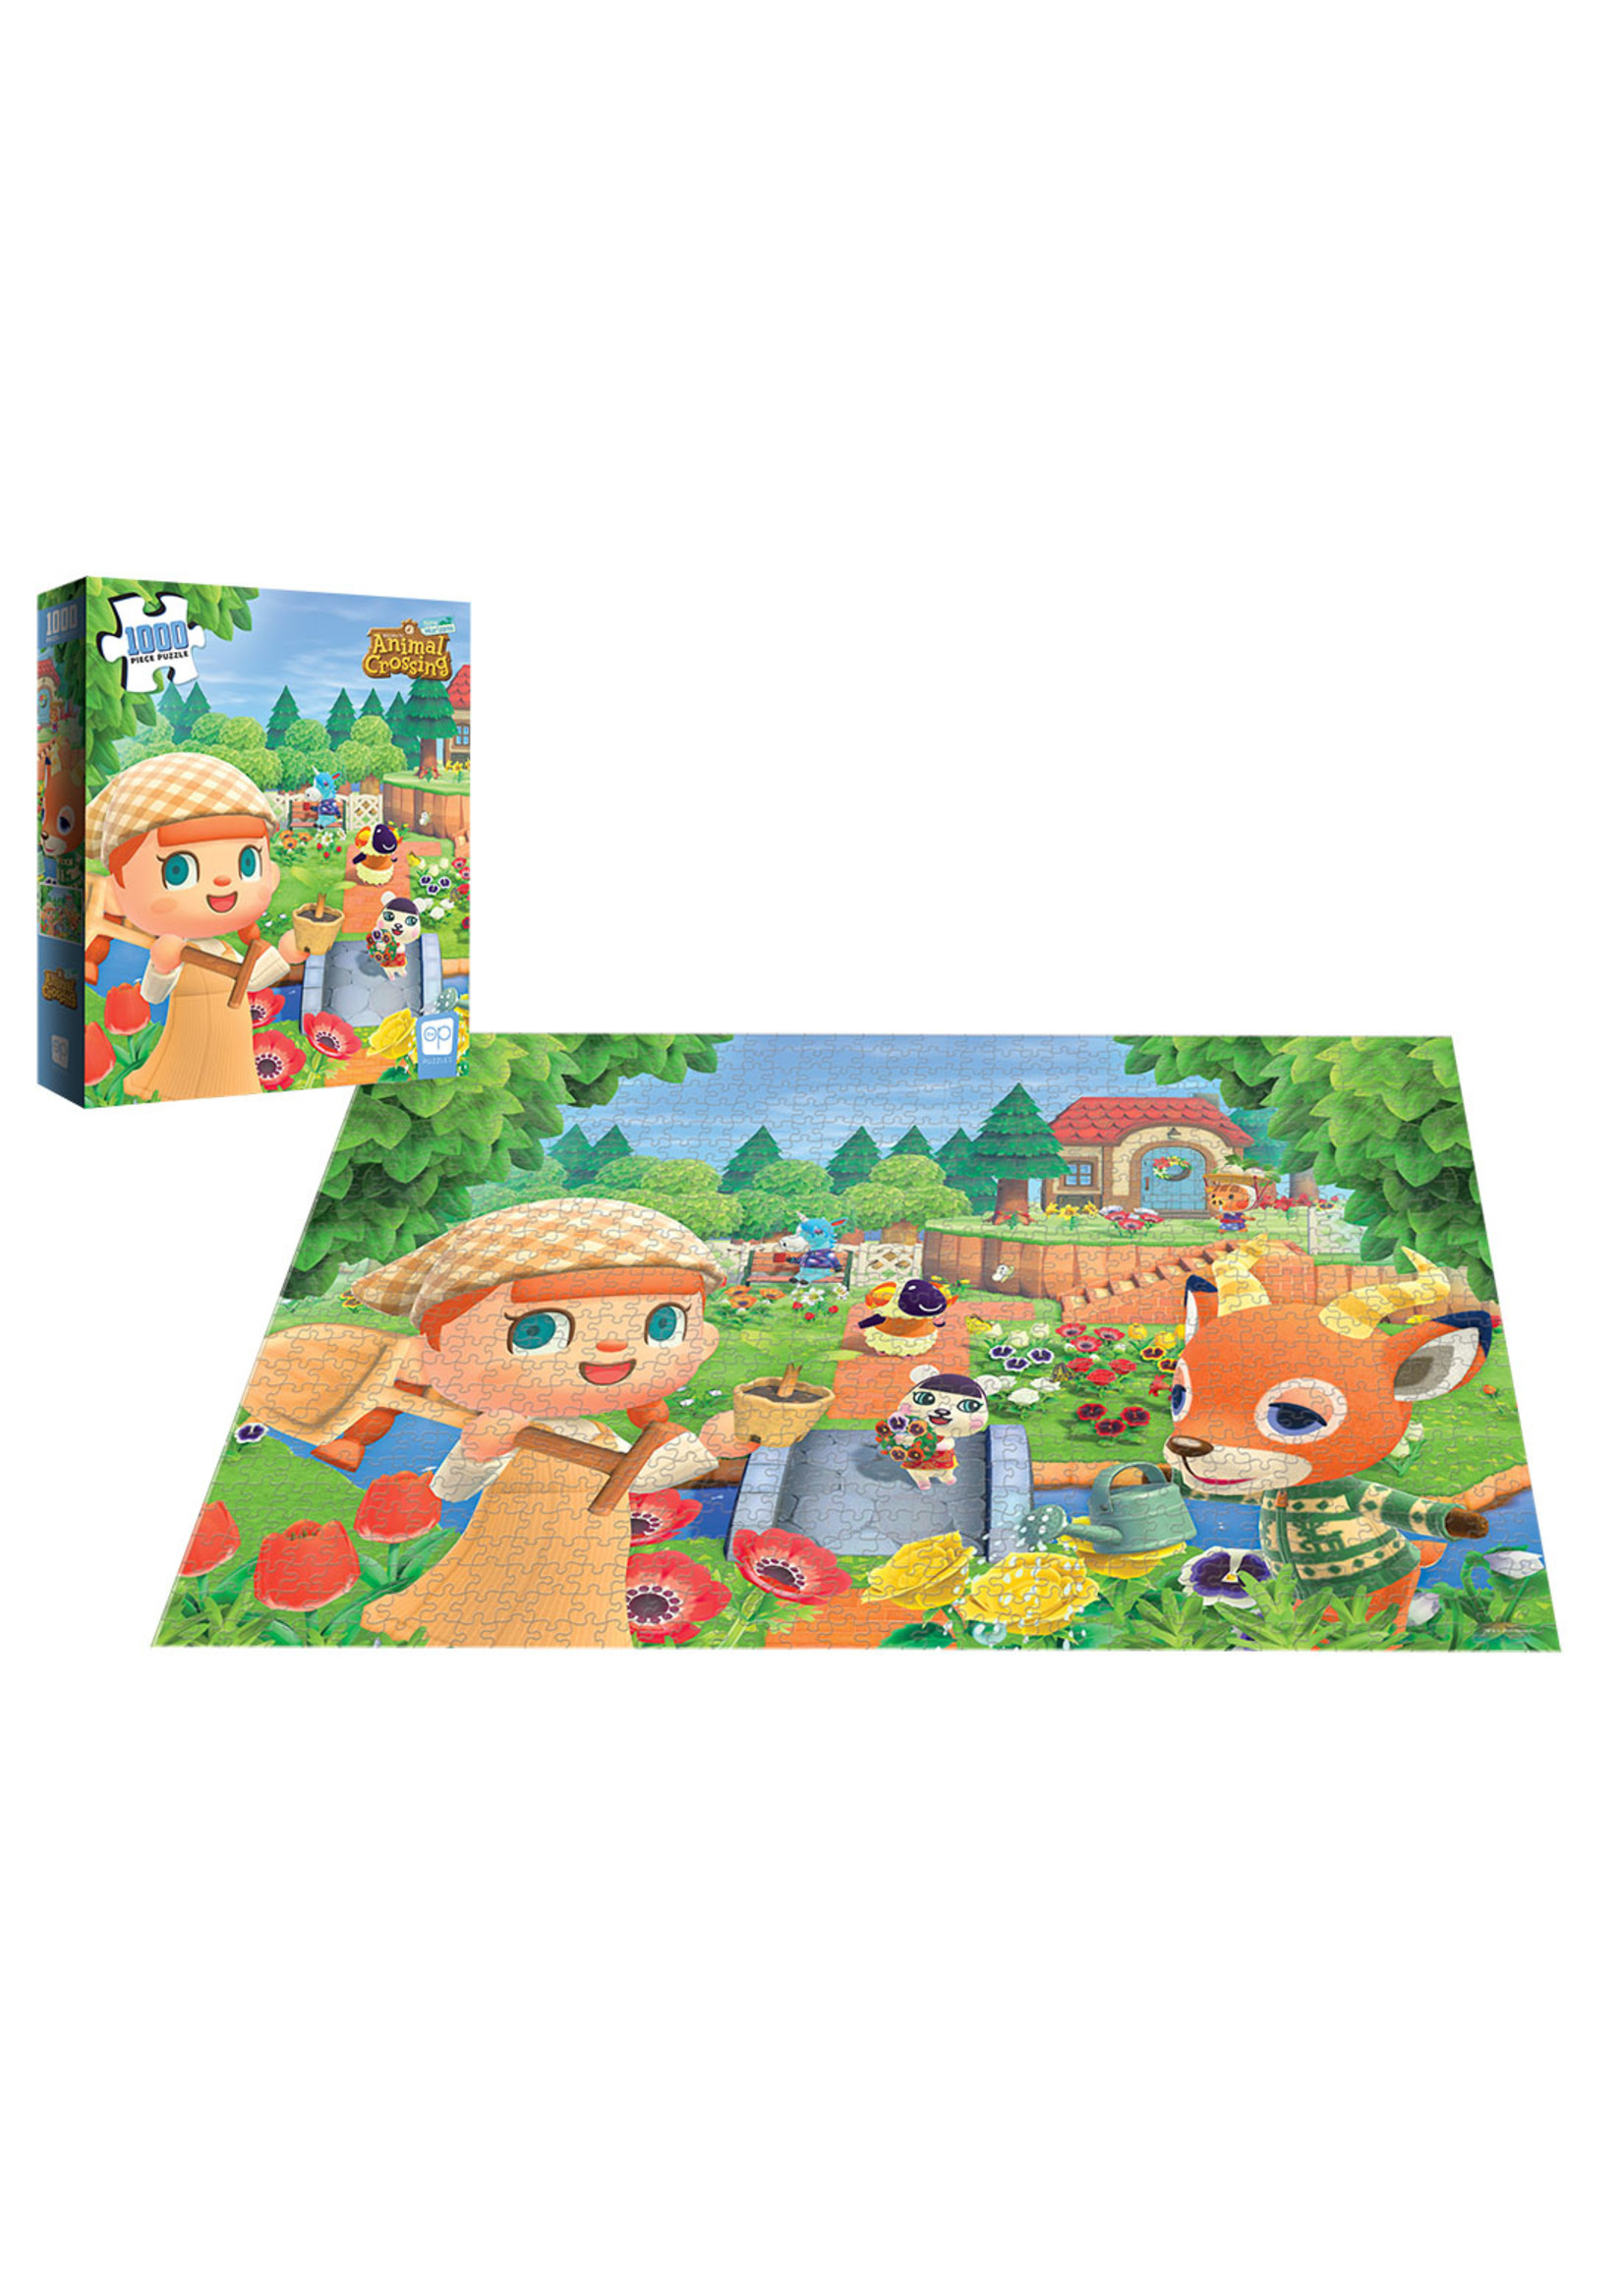 Winning Moves Puzzles: Animal Crossing ''New Horizons'' (1000 Piece)